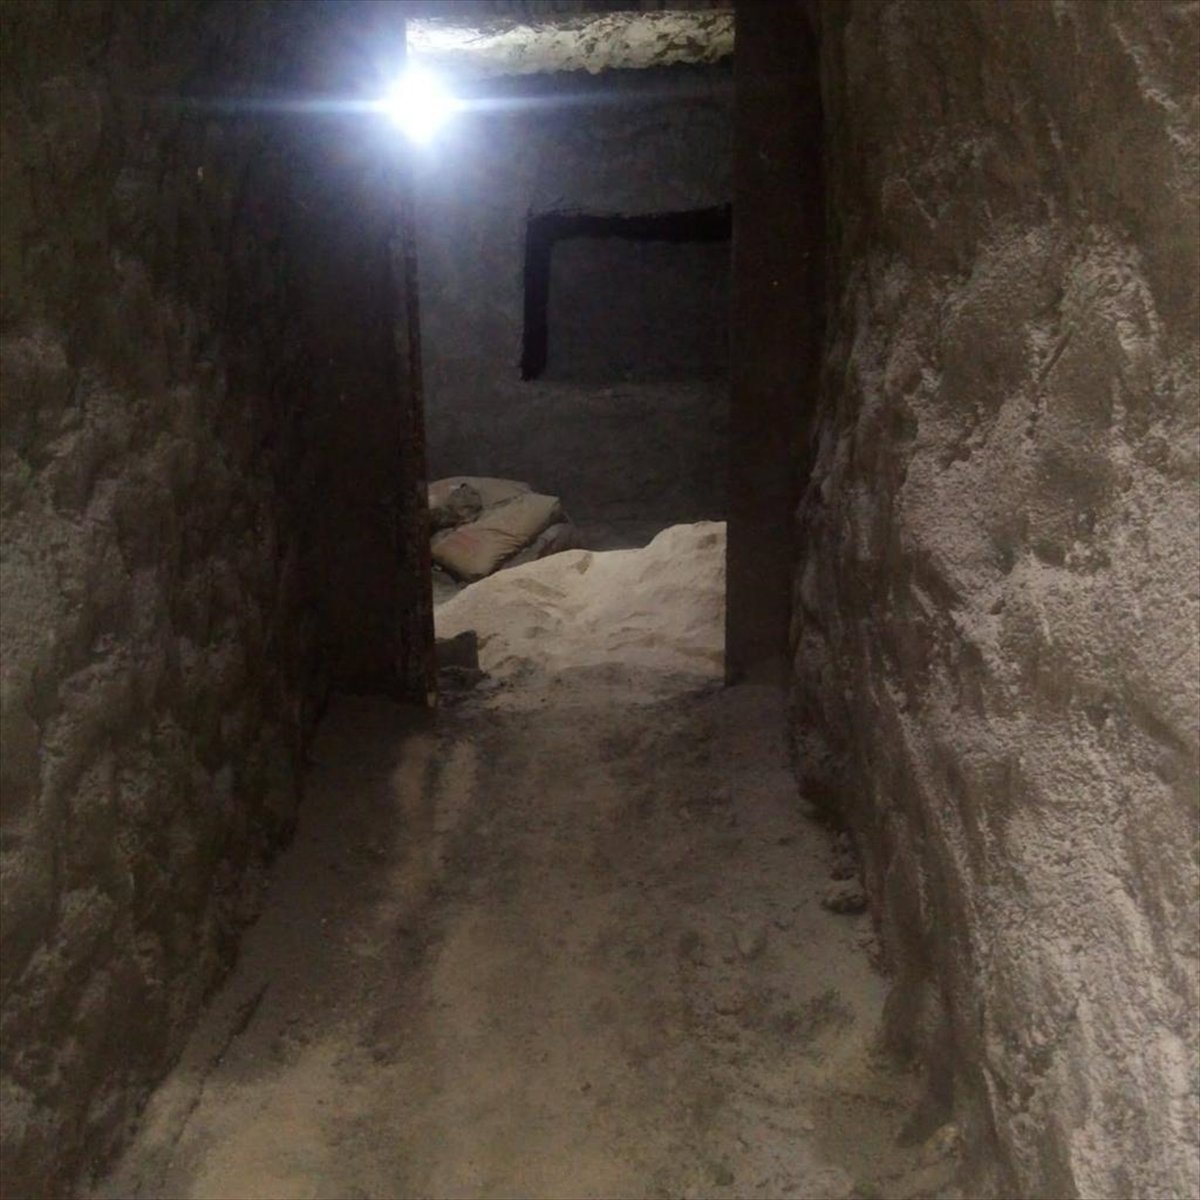 The terrorist organization PKK has the civilians it detained in Syria dig tunnels #1